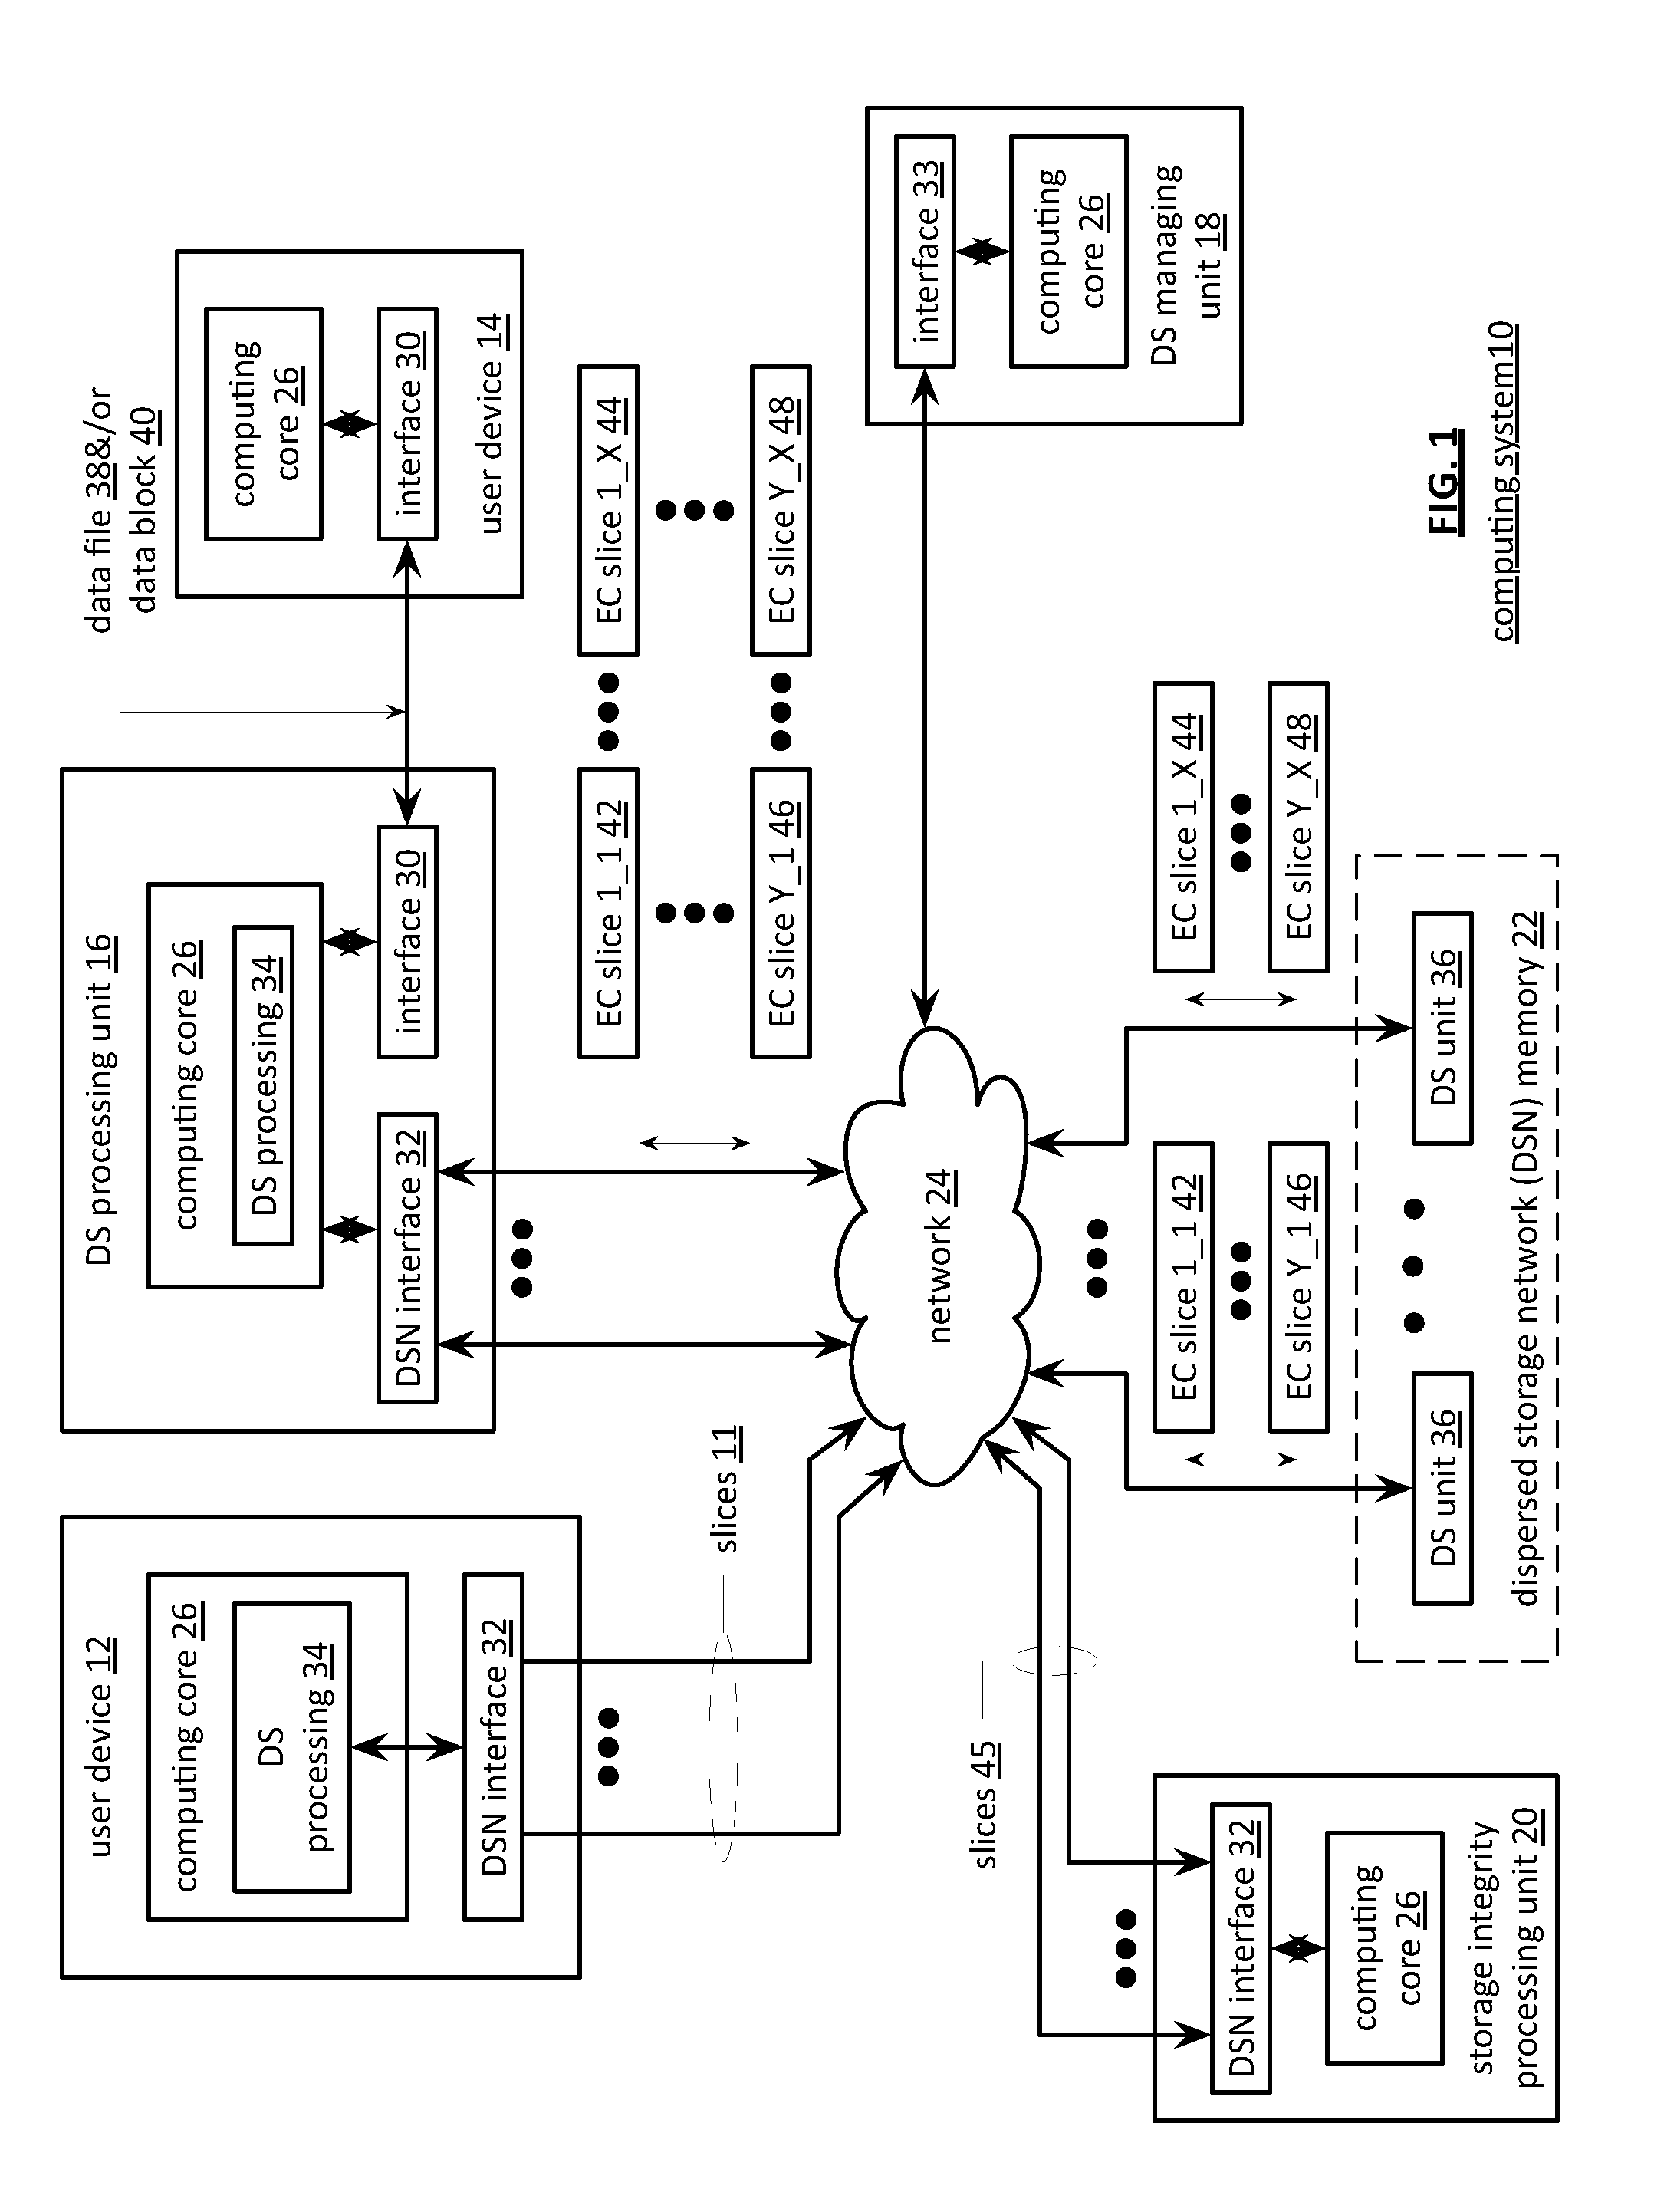 Memory utilization balancing in a dispersed storage network